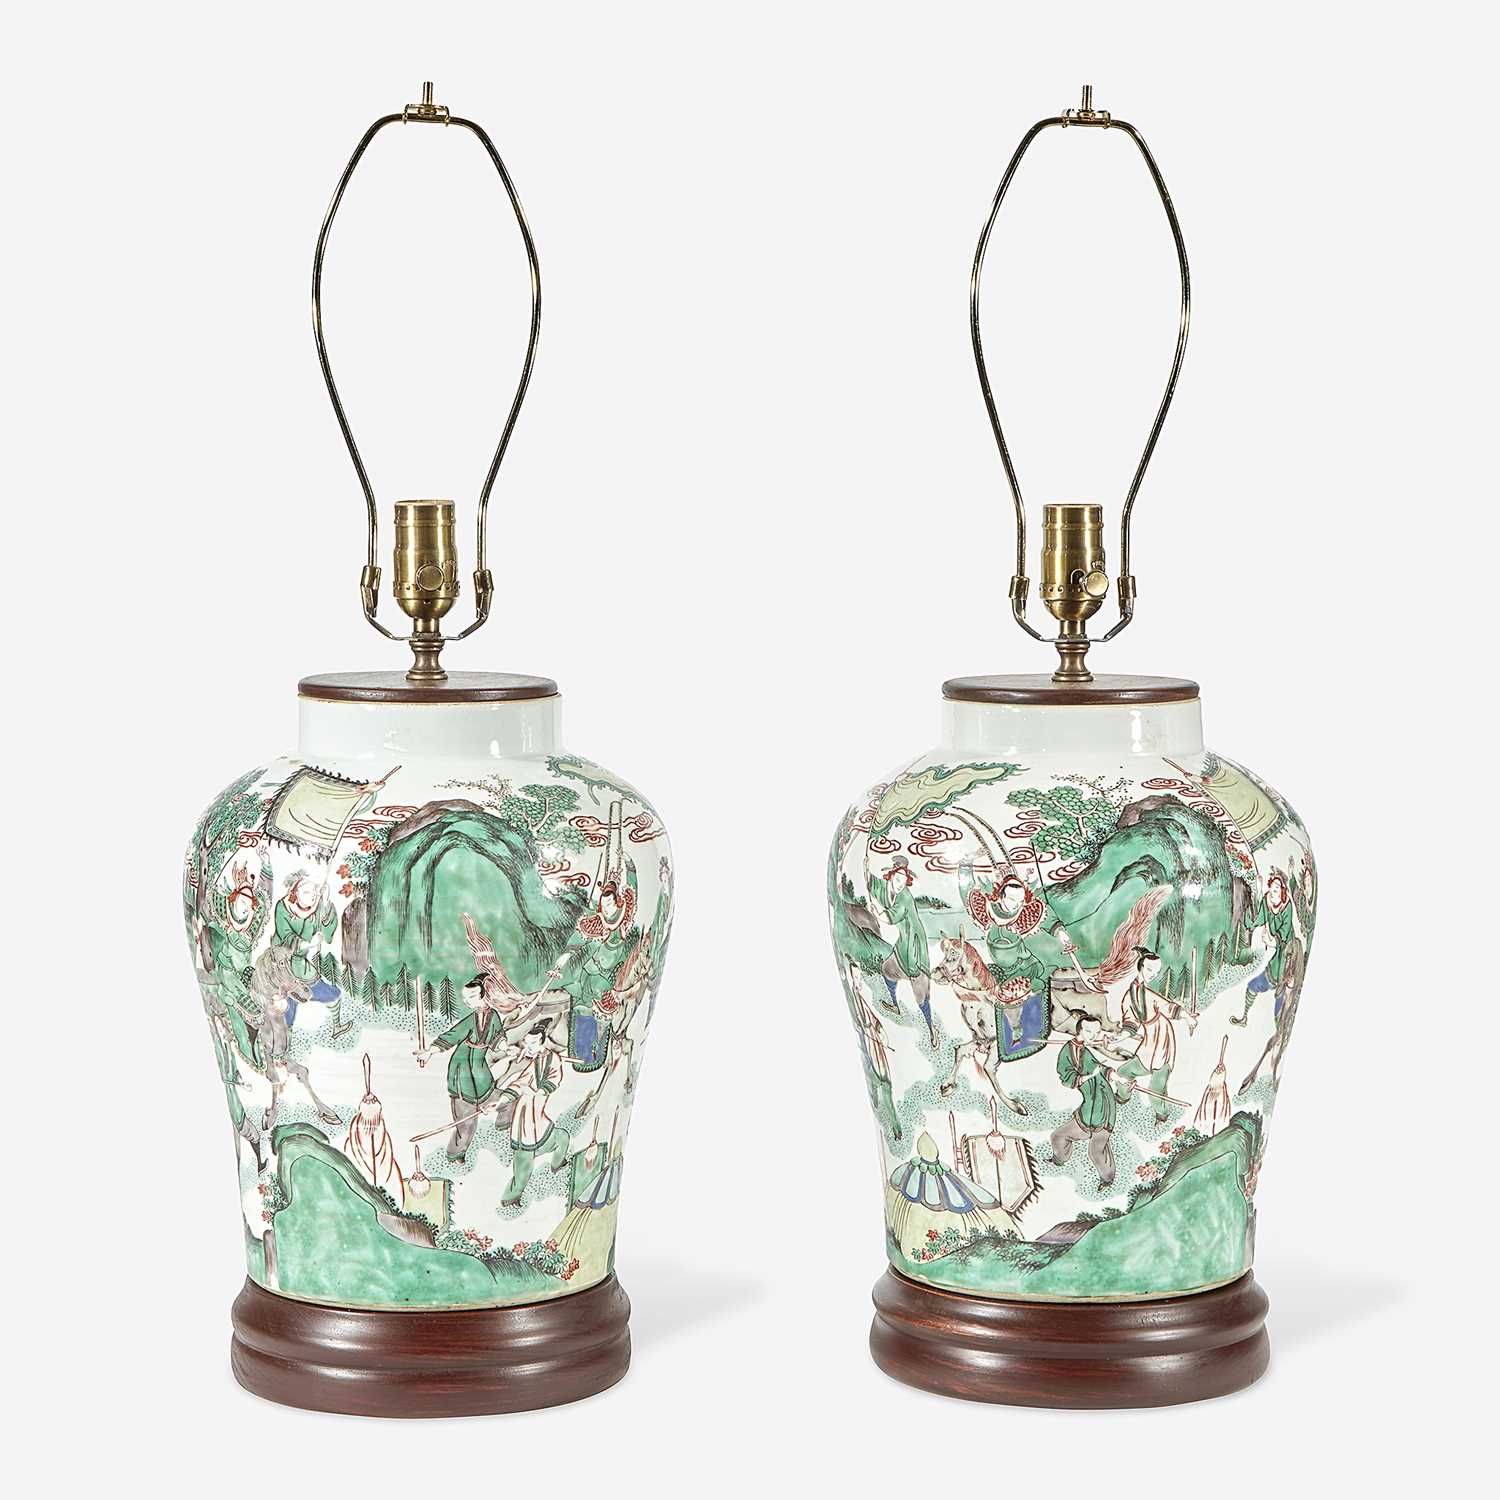 Lot 67 - A pair of Chinese famille verte-decorated porcelain jars mounted as lamps